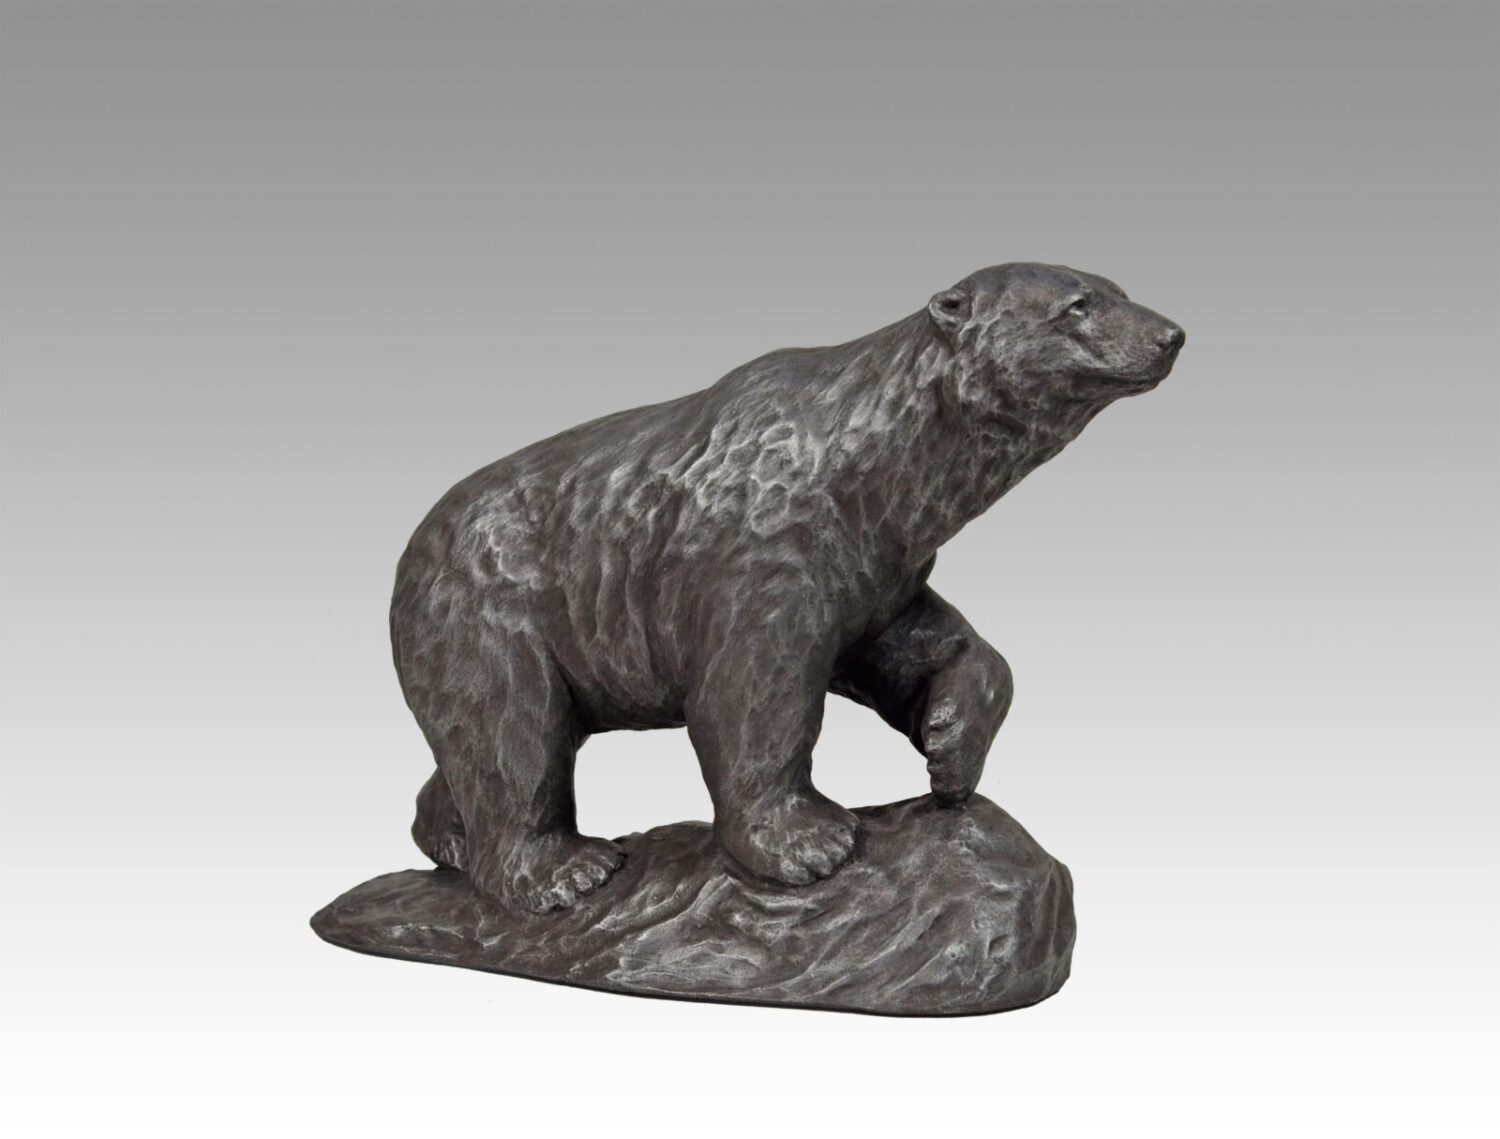 Gallery, Hopeful Return, $450 CAD, Metal Infused, 14 1/2" L x 10 1/4" H, Edition 12, Moonlit Ore Finish, Wildlife Sculpture of a polar bear, Sculptor Tyler Fauvelle